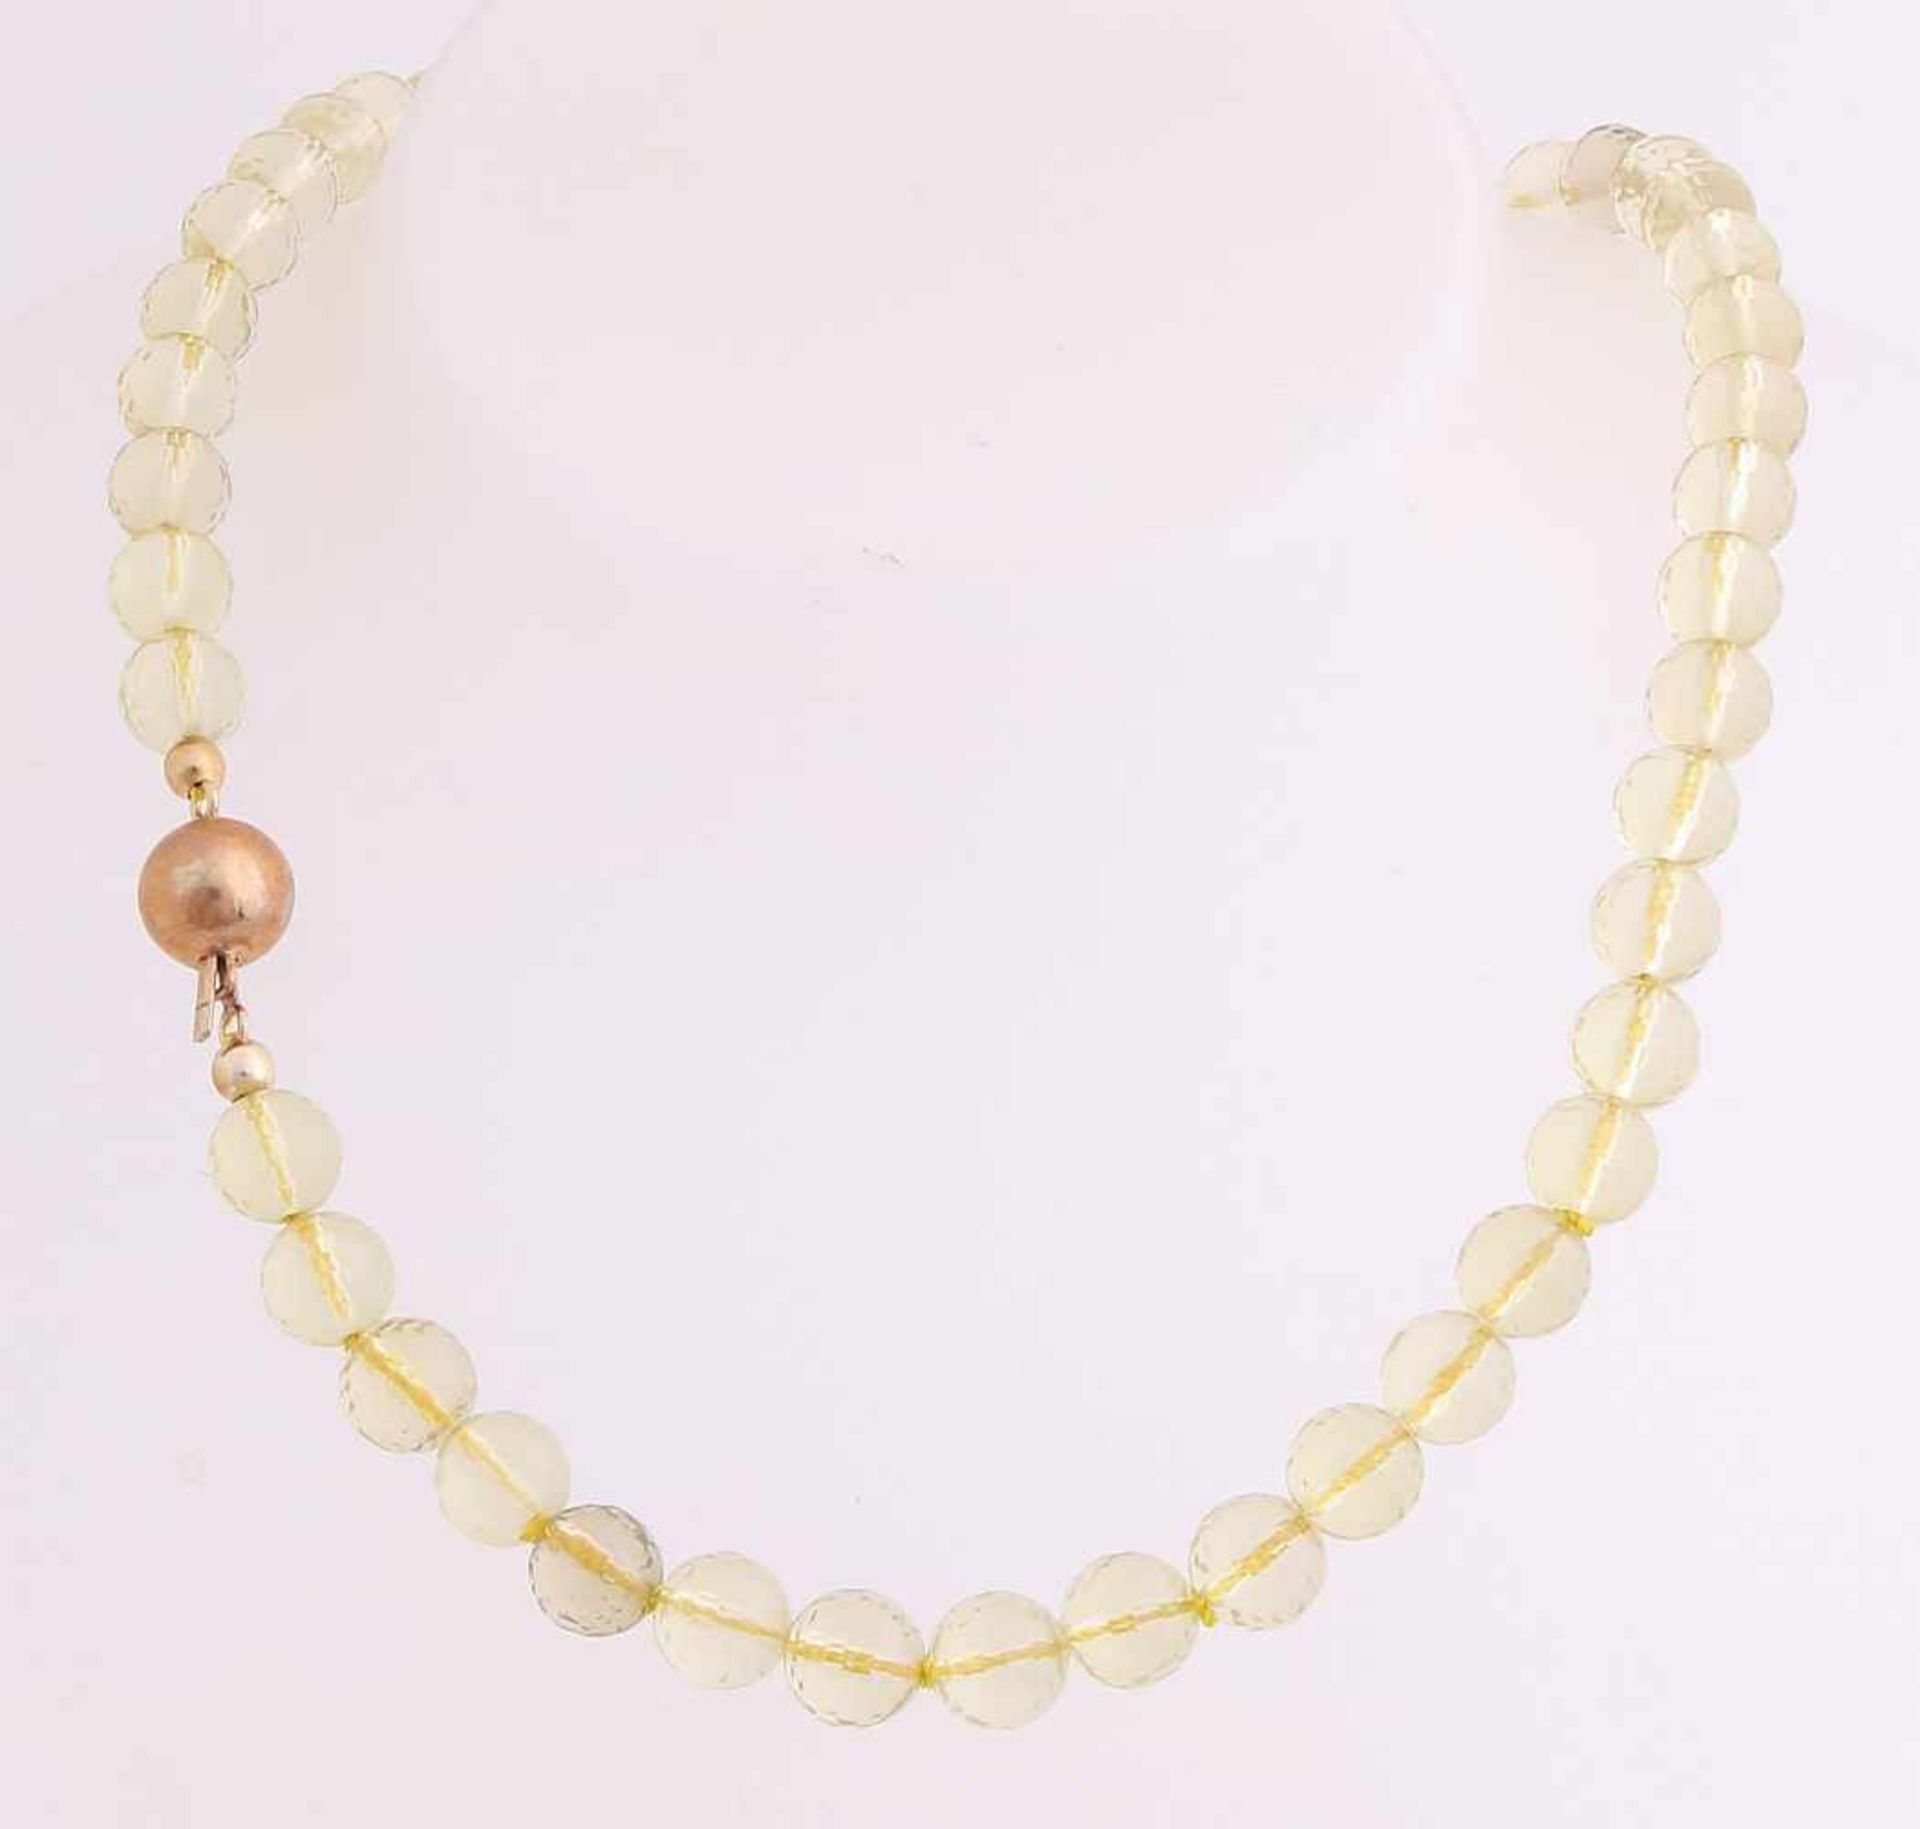 Collier of faceted citrienkralen, ø 7.5 mm, attached to a yellow-golden ball-clasp, ø 10 mm.